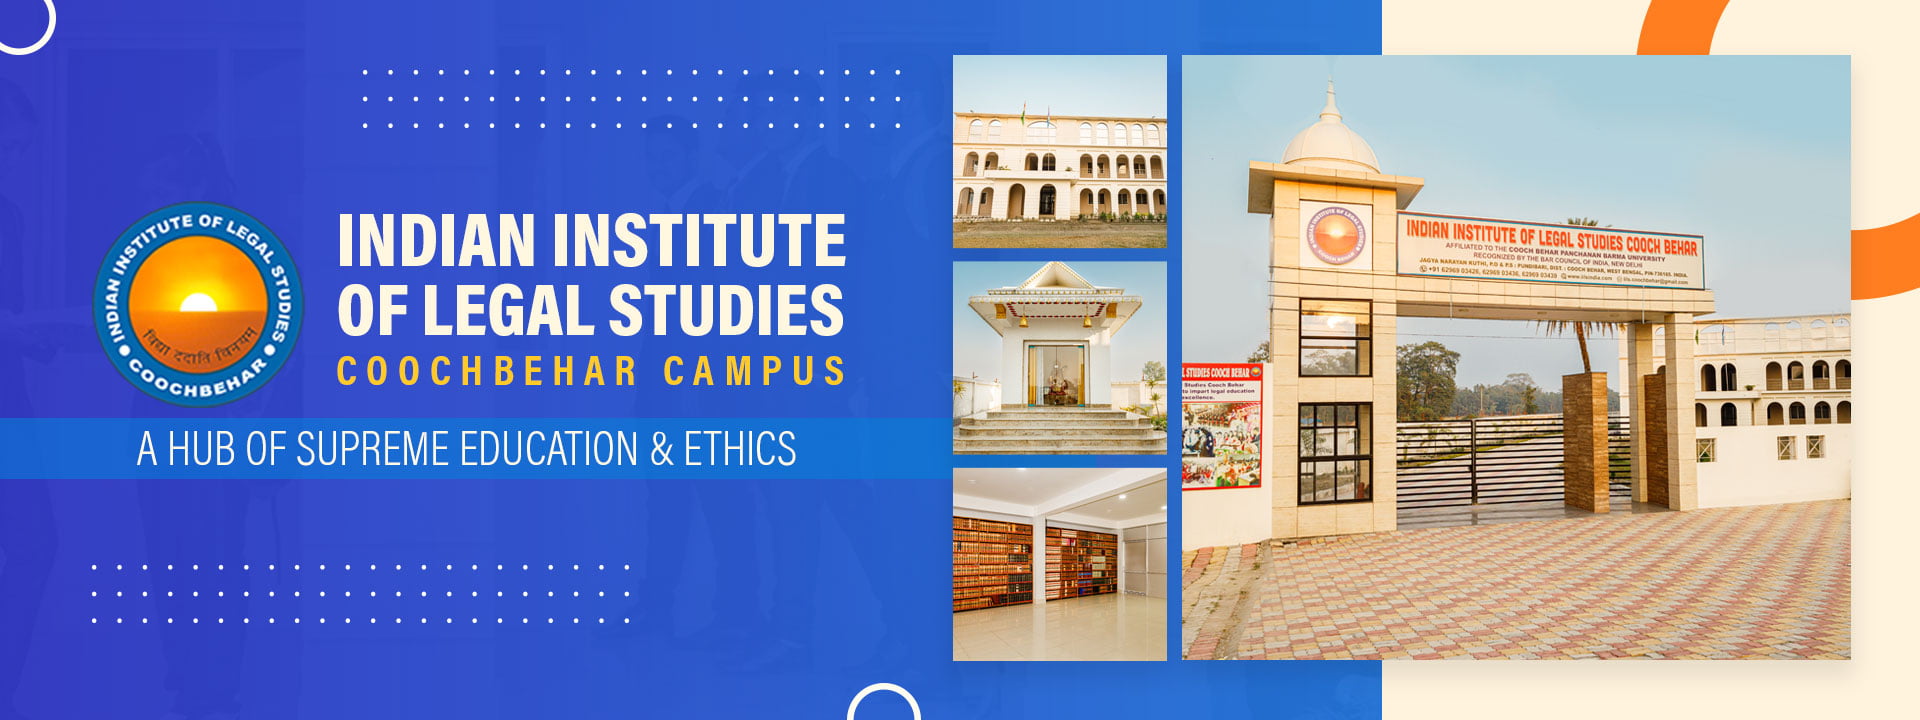 Indian Institute of Legal Studies Coochbehar Campus, A hub of Supreme Education and Ethics